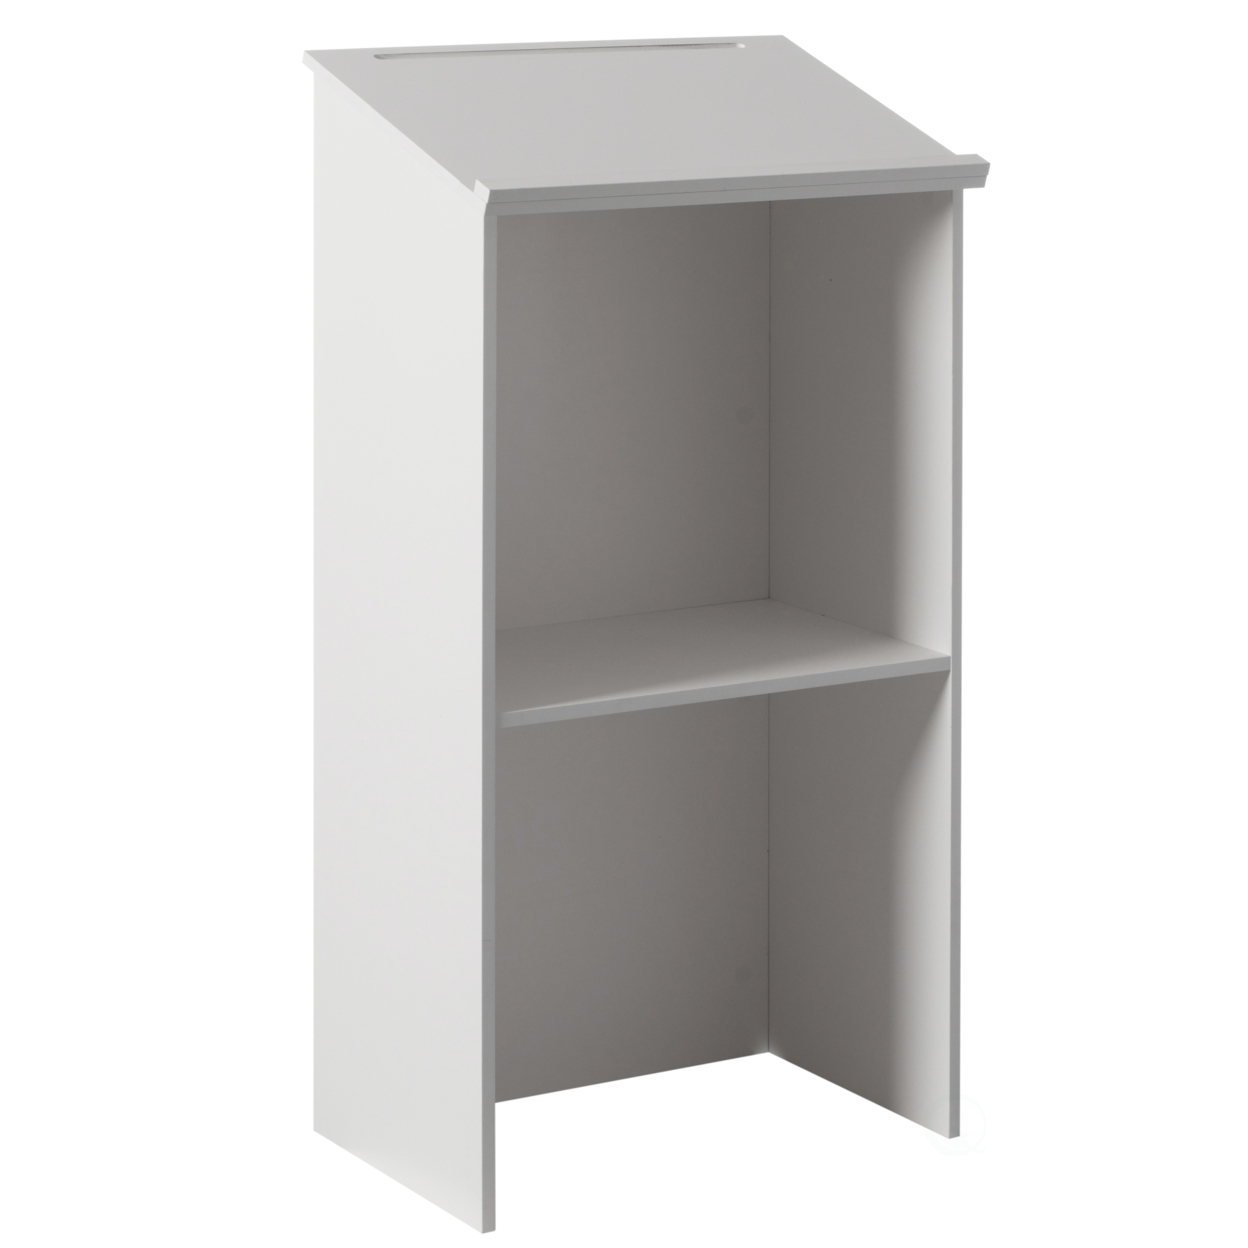 Standing Floor Podium With Storage For Church, School, Office Or Home - White